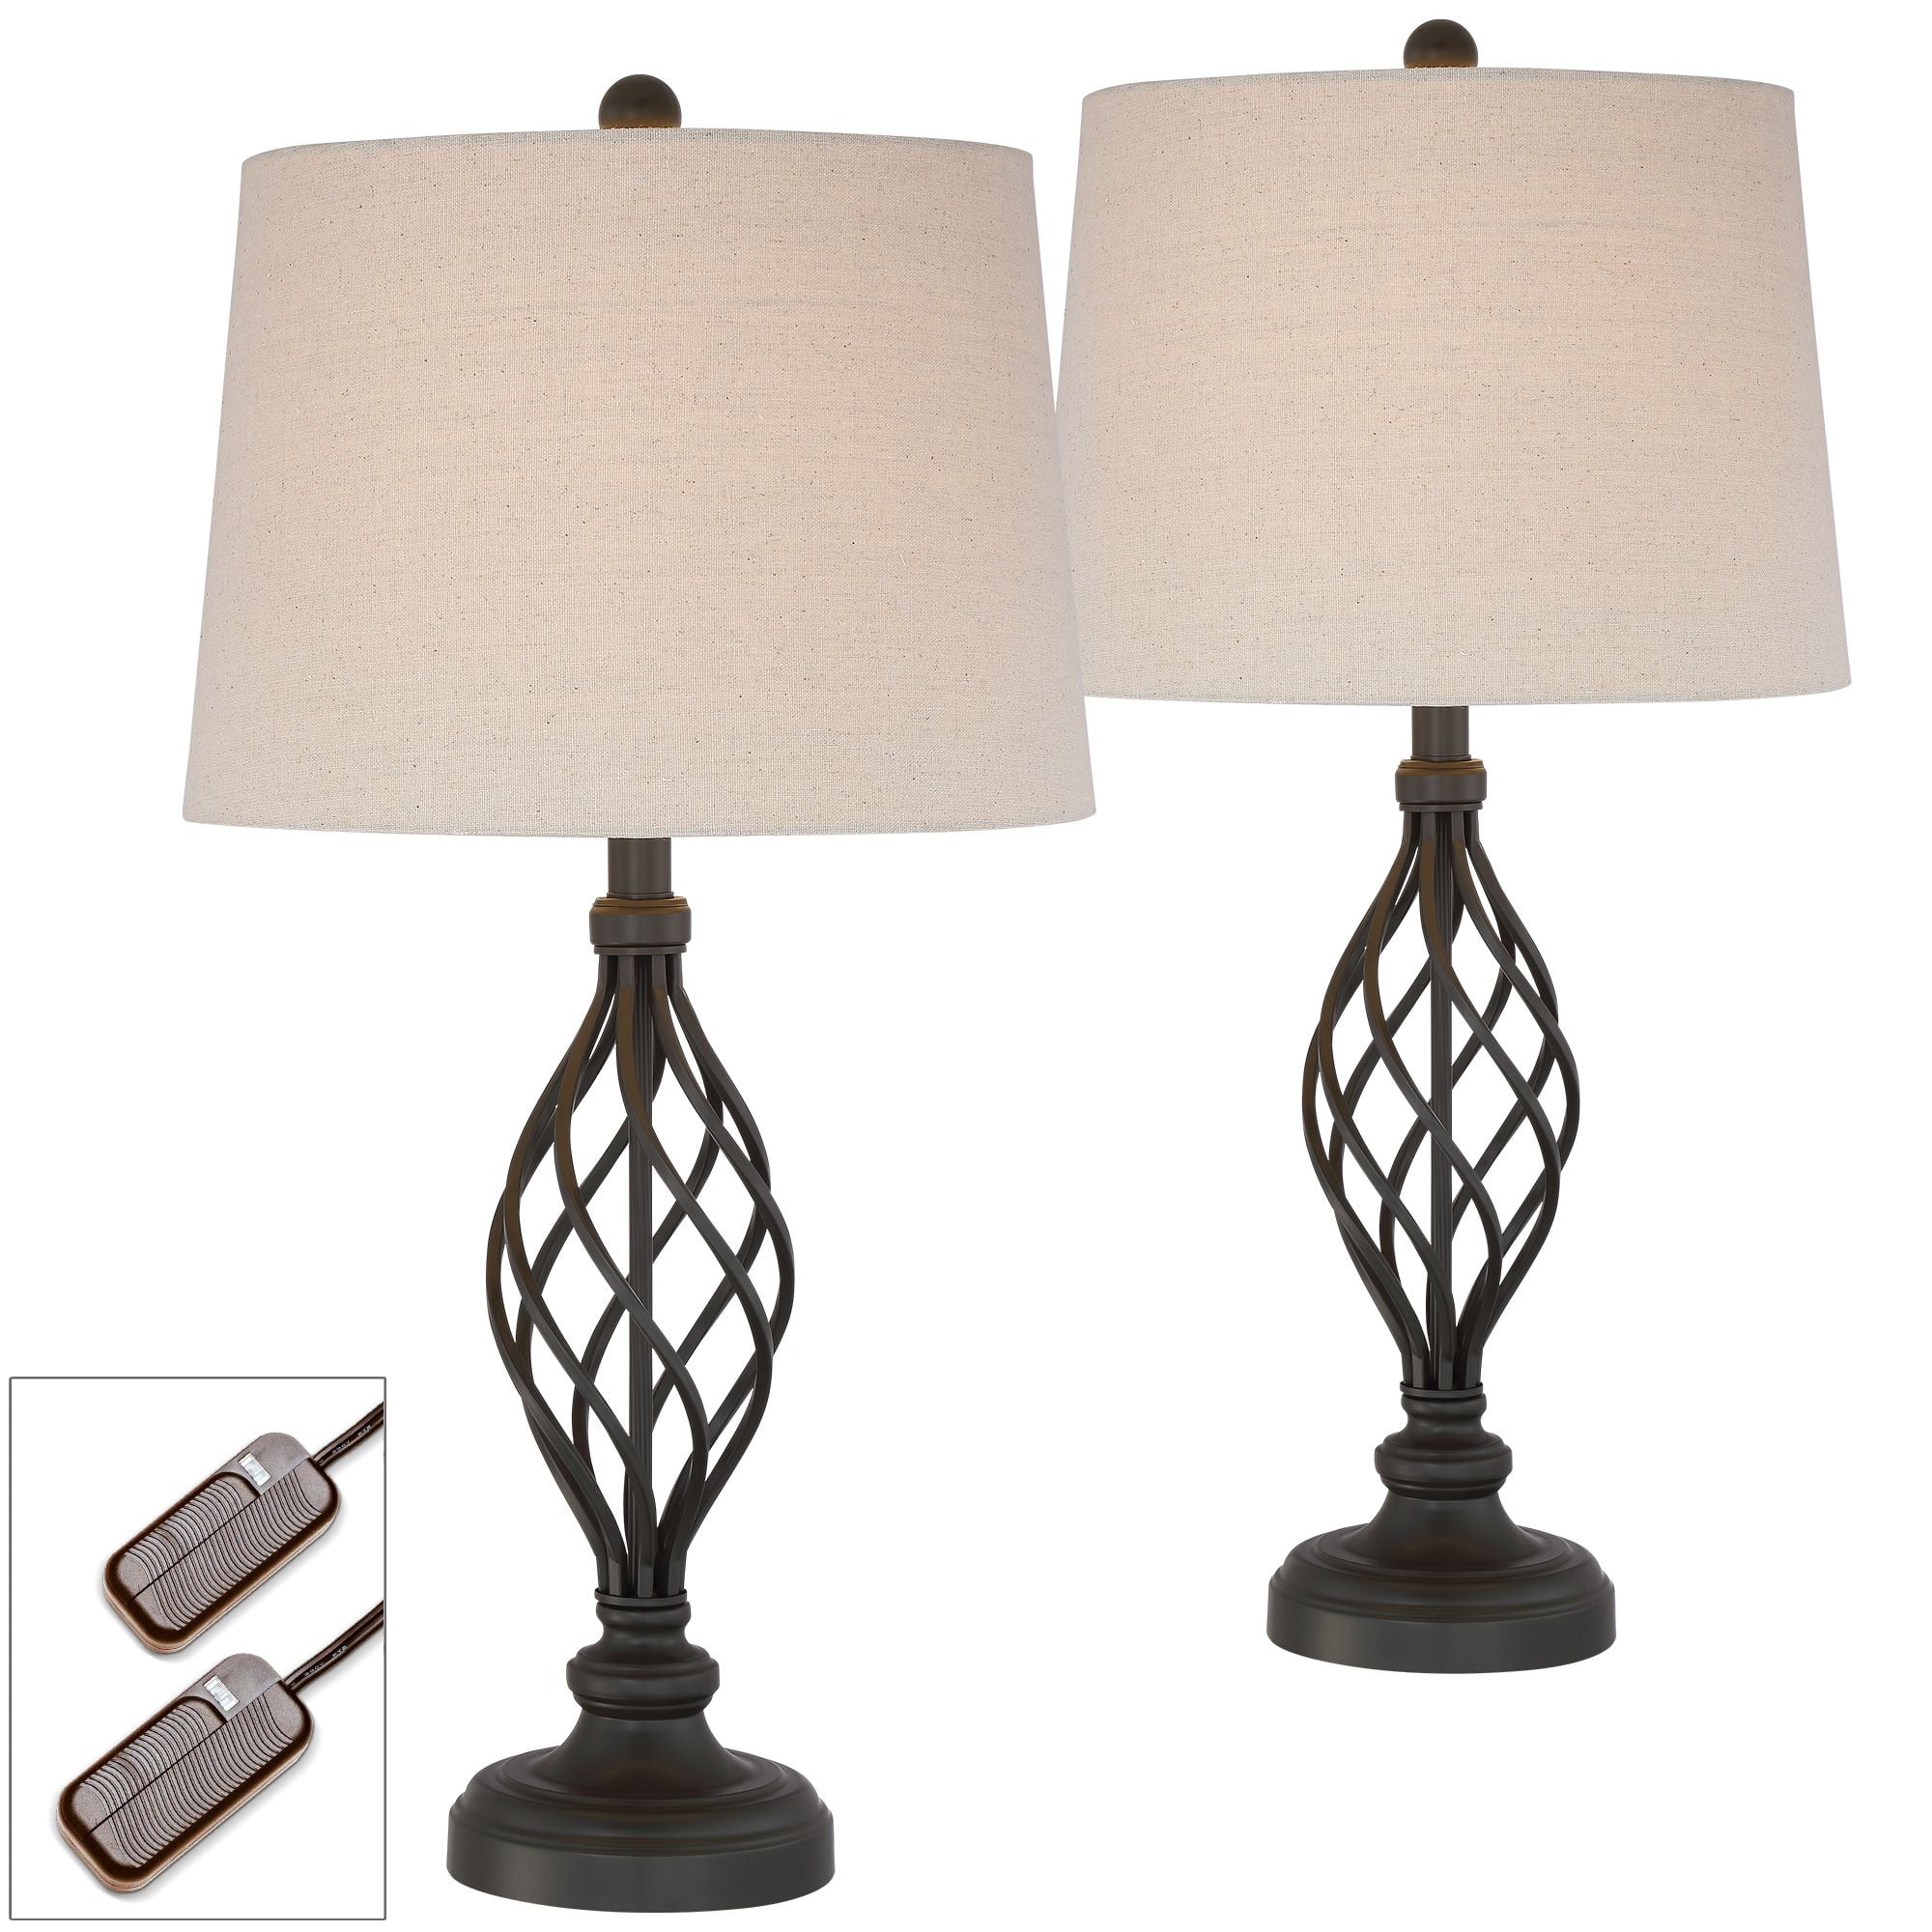 Franklin Iron Works Annie Iron Scroll Lamps Set of 2 with Table Top